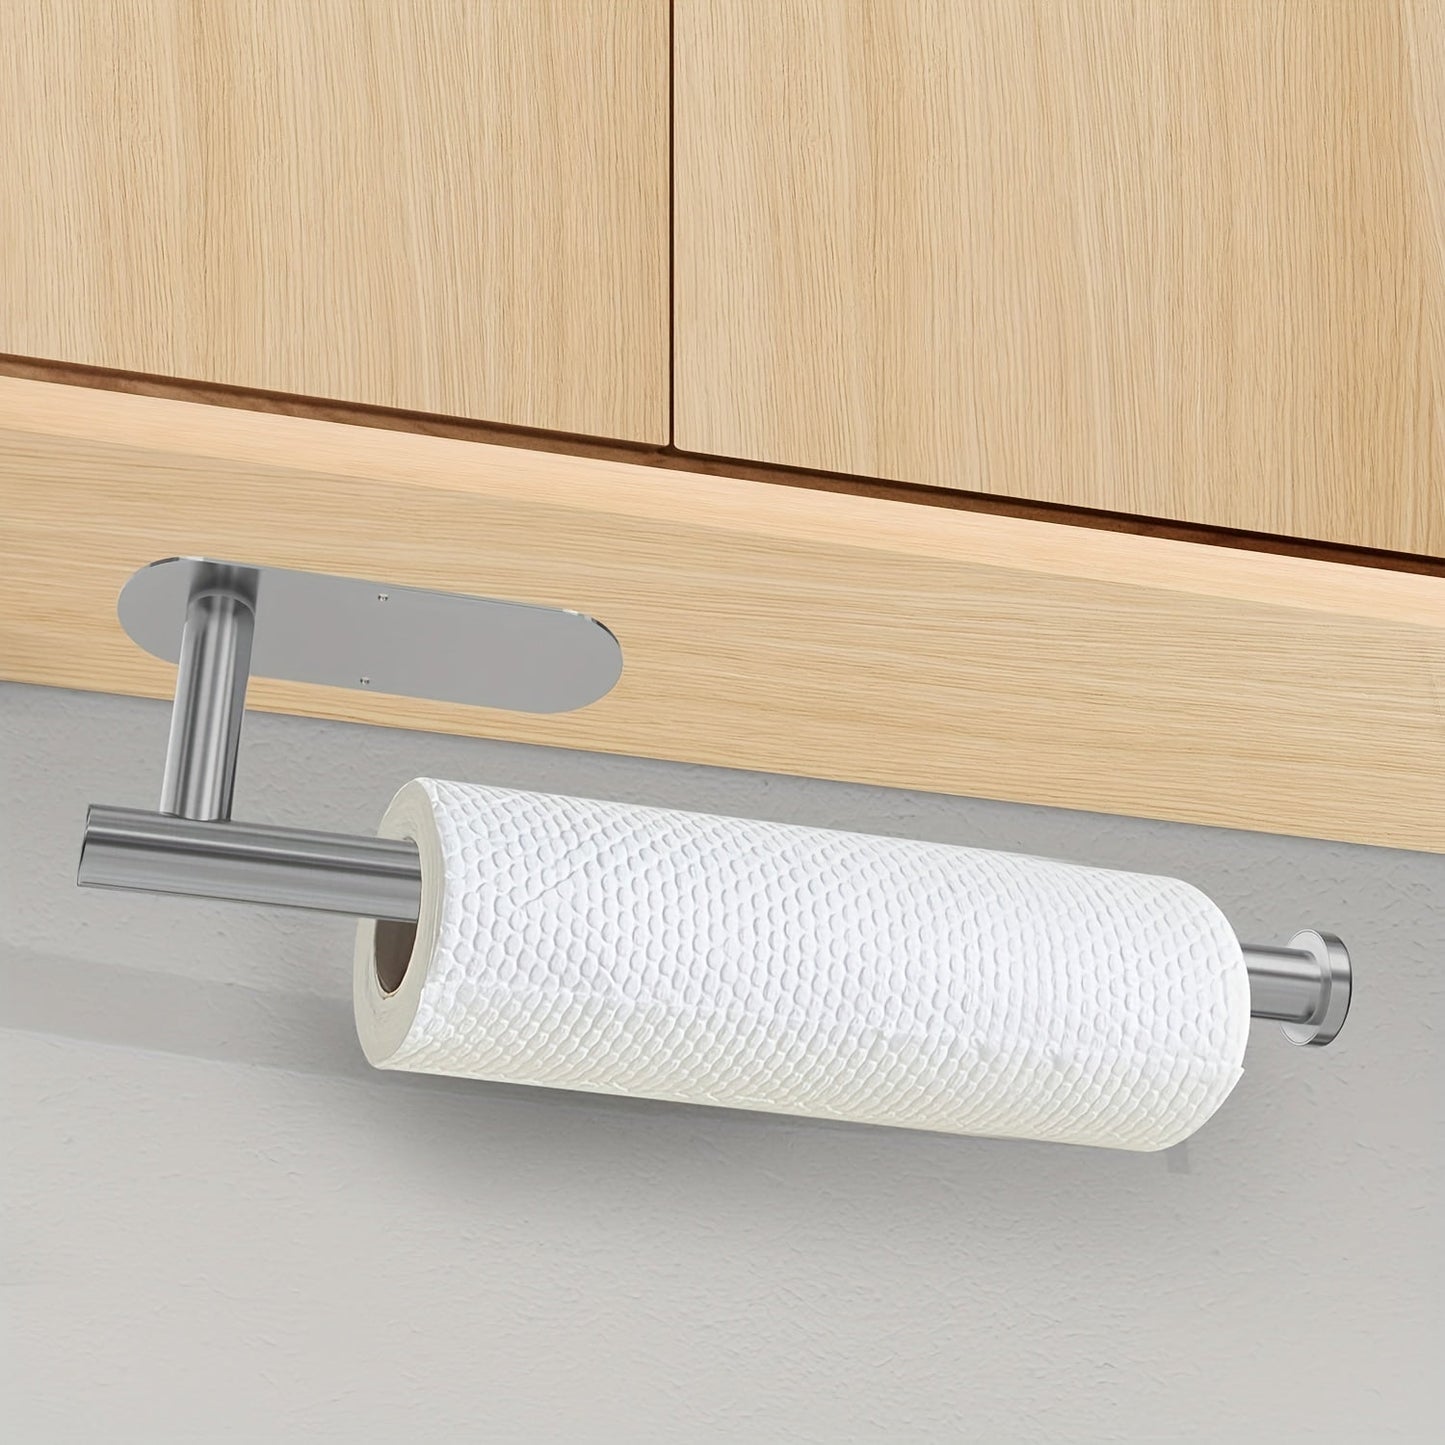 Paper Towel Holders, Paper Towels Rolls, For Kitchen,Paper Towels Bulk, Self-Adhesive Under Cabinet, Both Available In Adhesive And Screws, Stainless Steel Paper Towel Holder 1pc